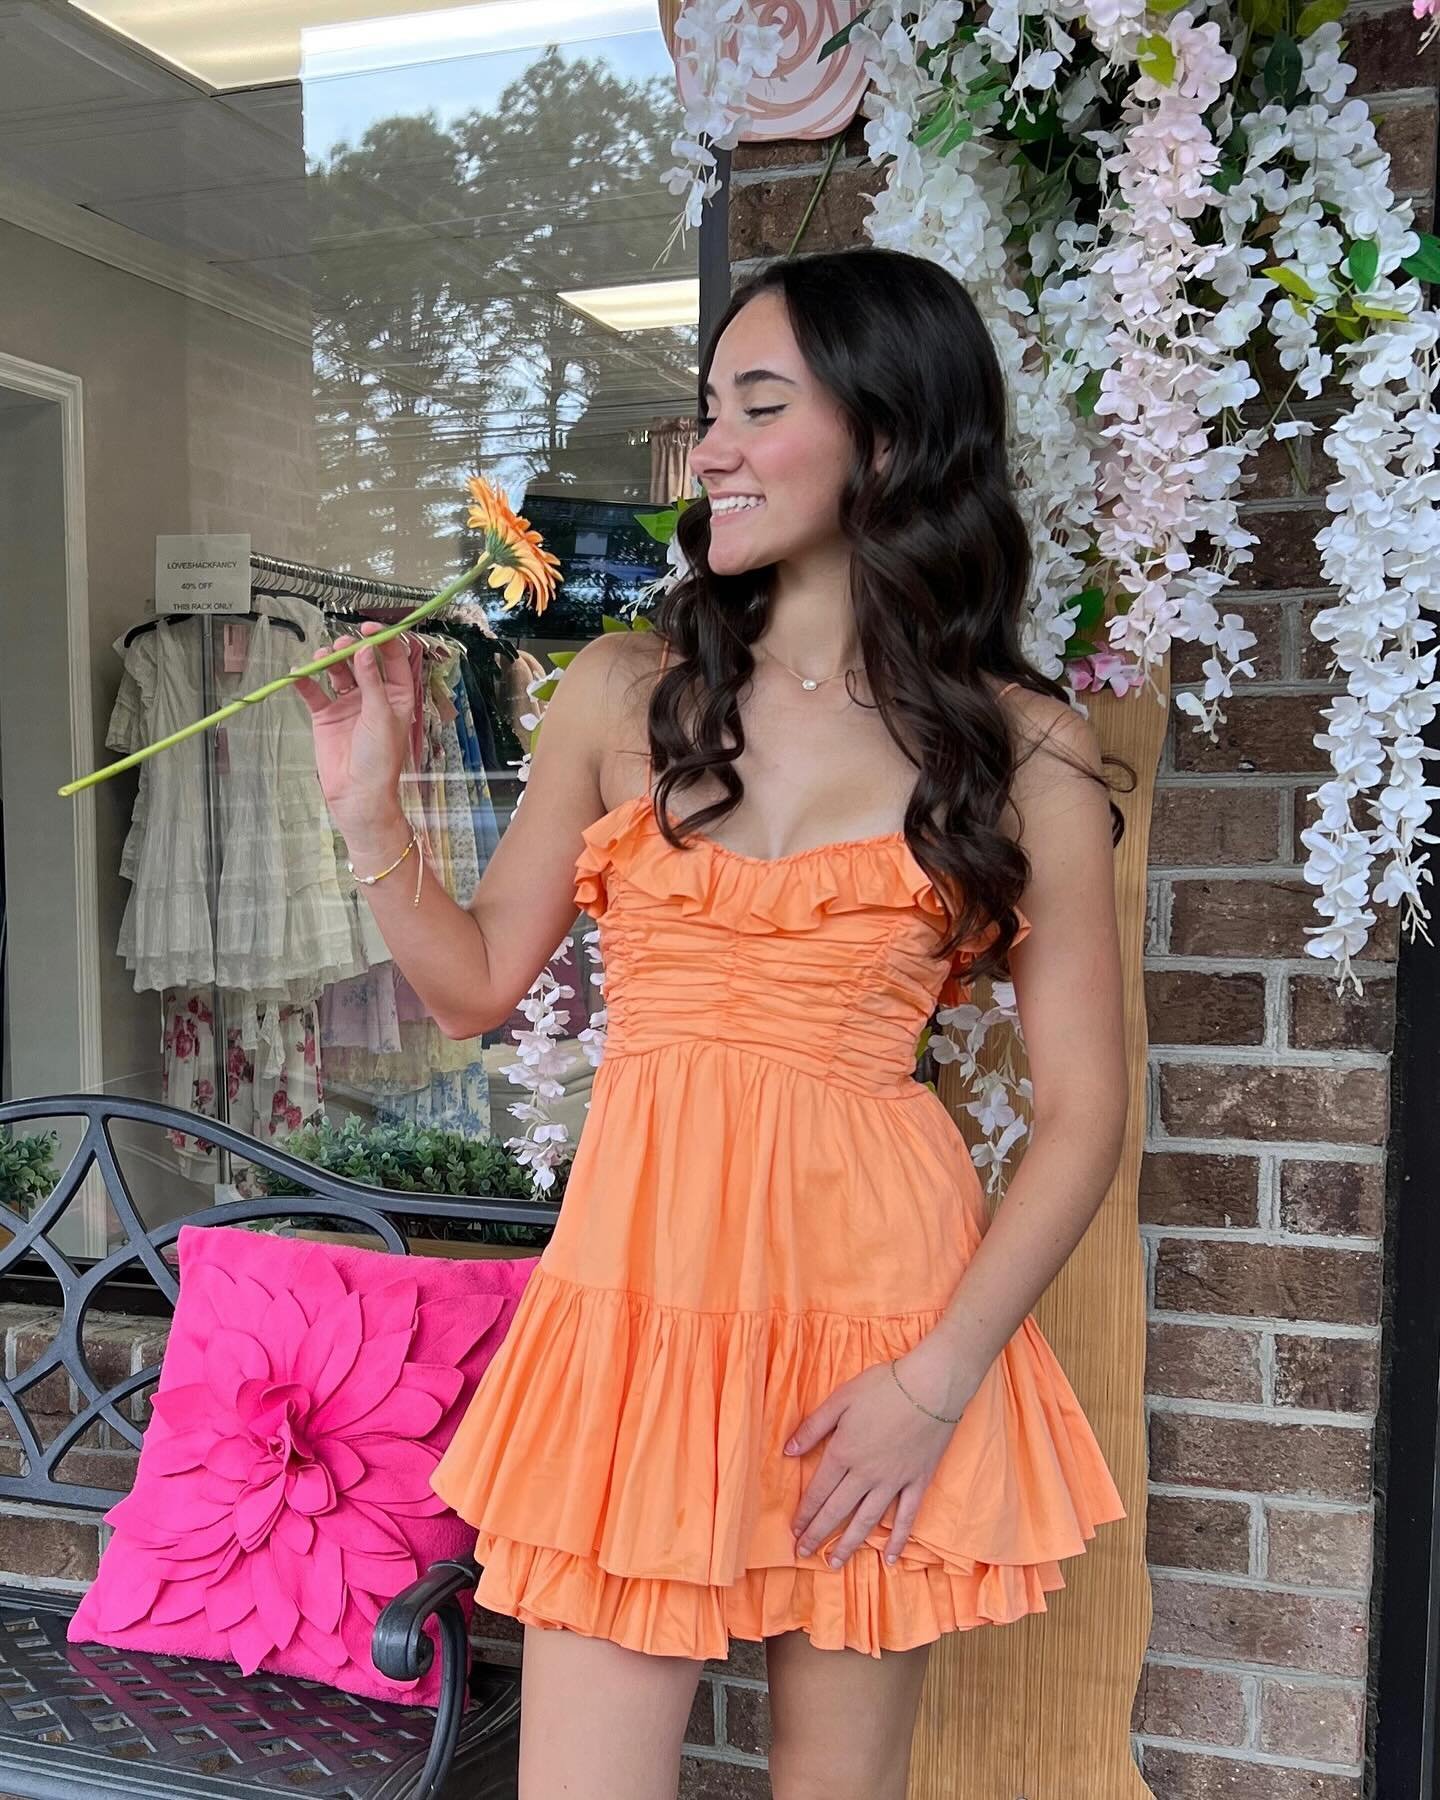 The perfect summer dress!!! WE ARE IN LOVE!! Shop in store now in multiple sizes!! 🧡🍊🍑 #AATRNC 
@loveshackfancy 

#aatrnc #aatr #dresses #dress #fayettevillenc #northcarolina #raleigh #charlotte #durham #prom #wilmington #concord #southcarolina #d